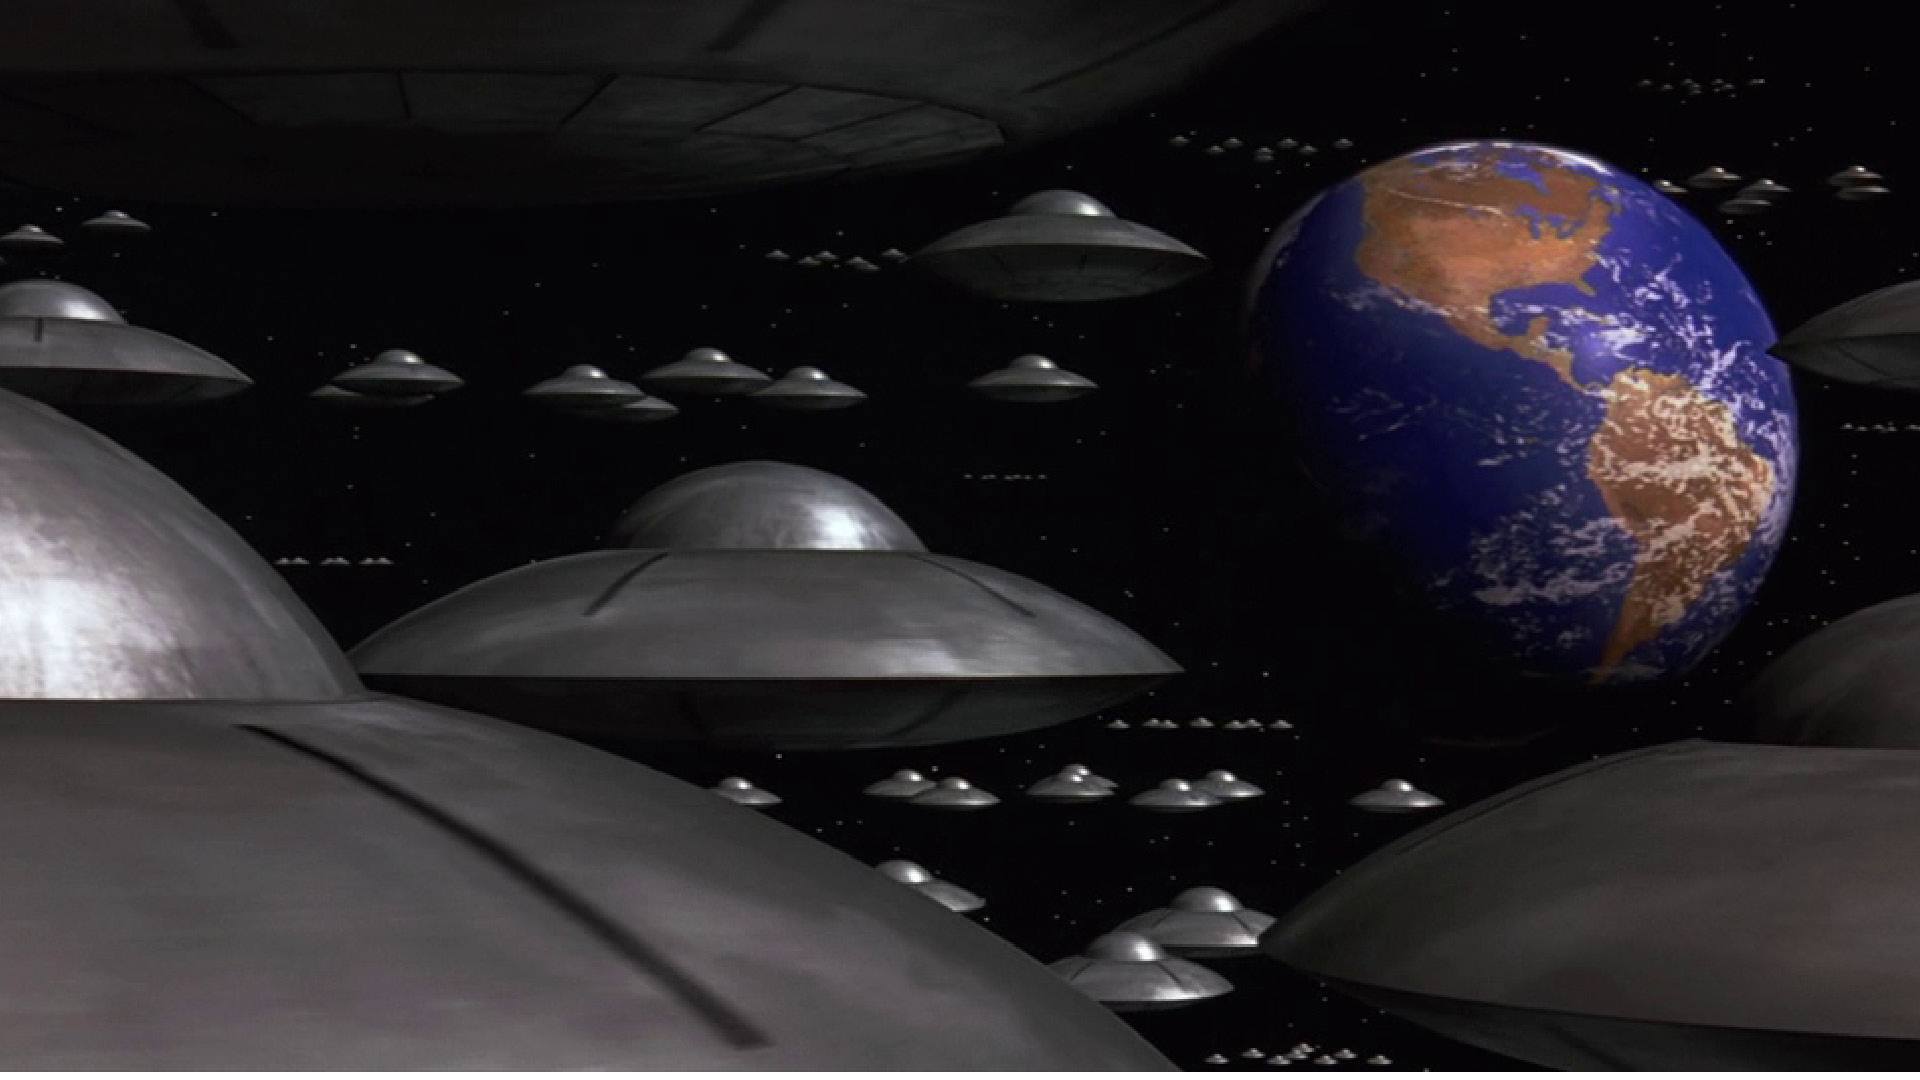 MARS ATTACKS! film still of Earth and black space ships